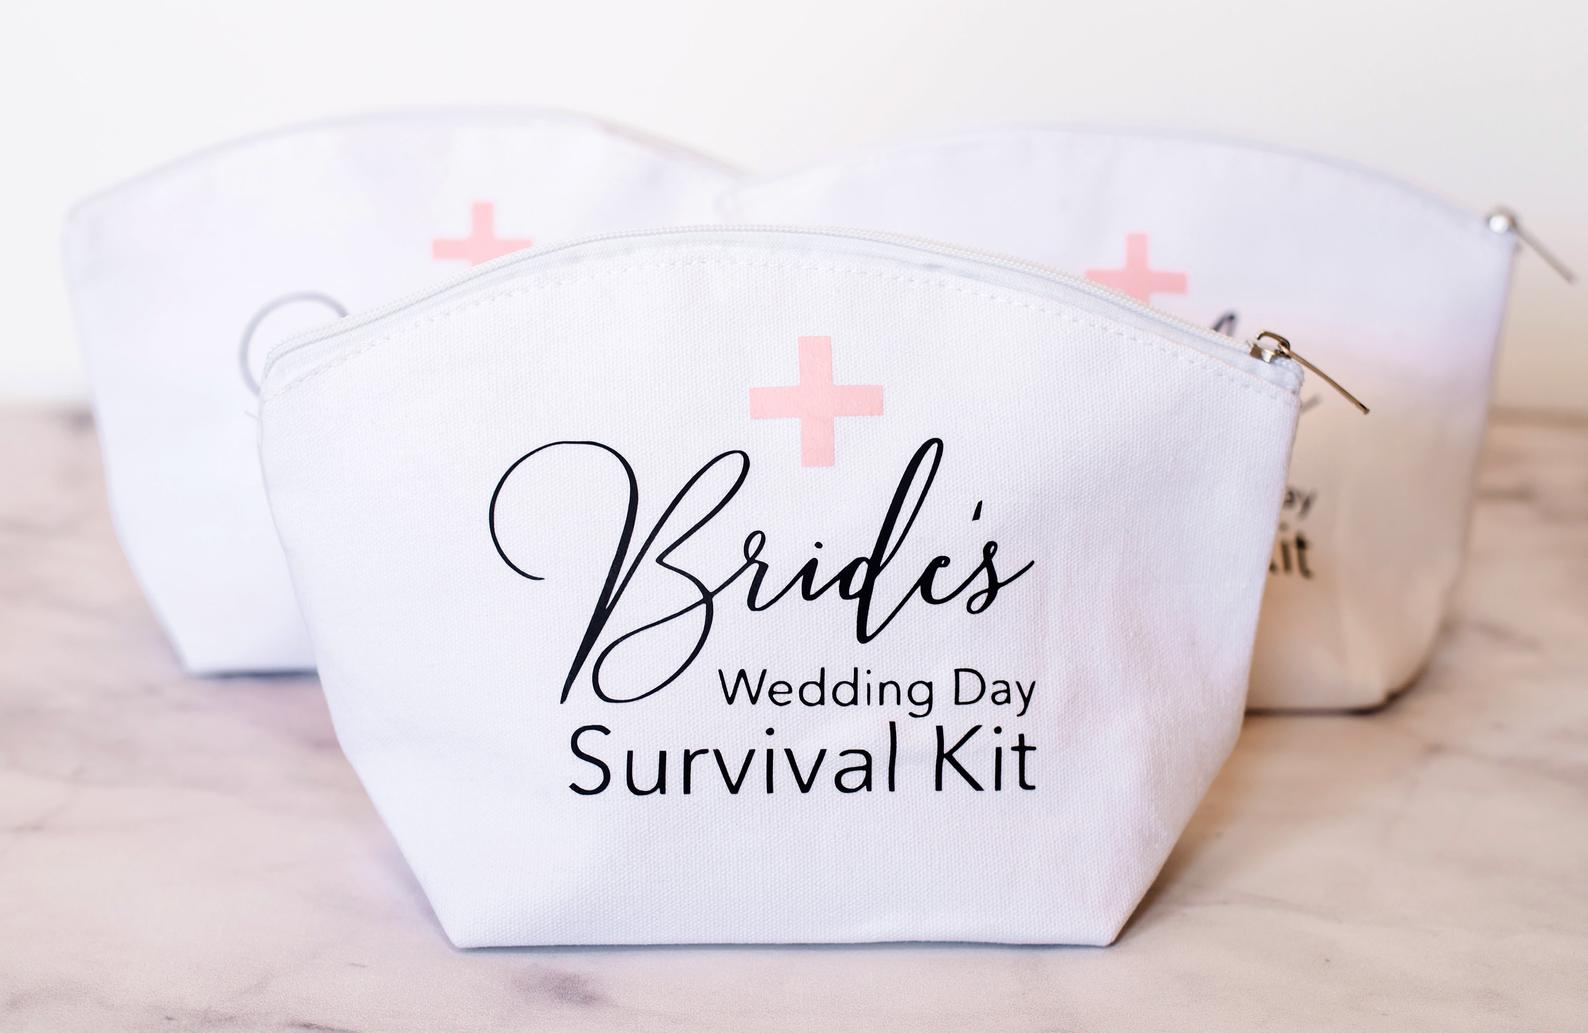 Building the Perfect Wedding Day Emergency Kit The Historic Alfred I.  duPont Building